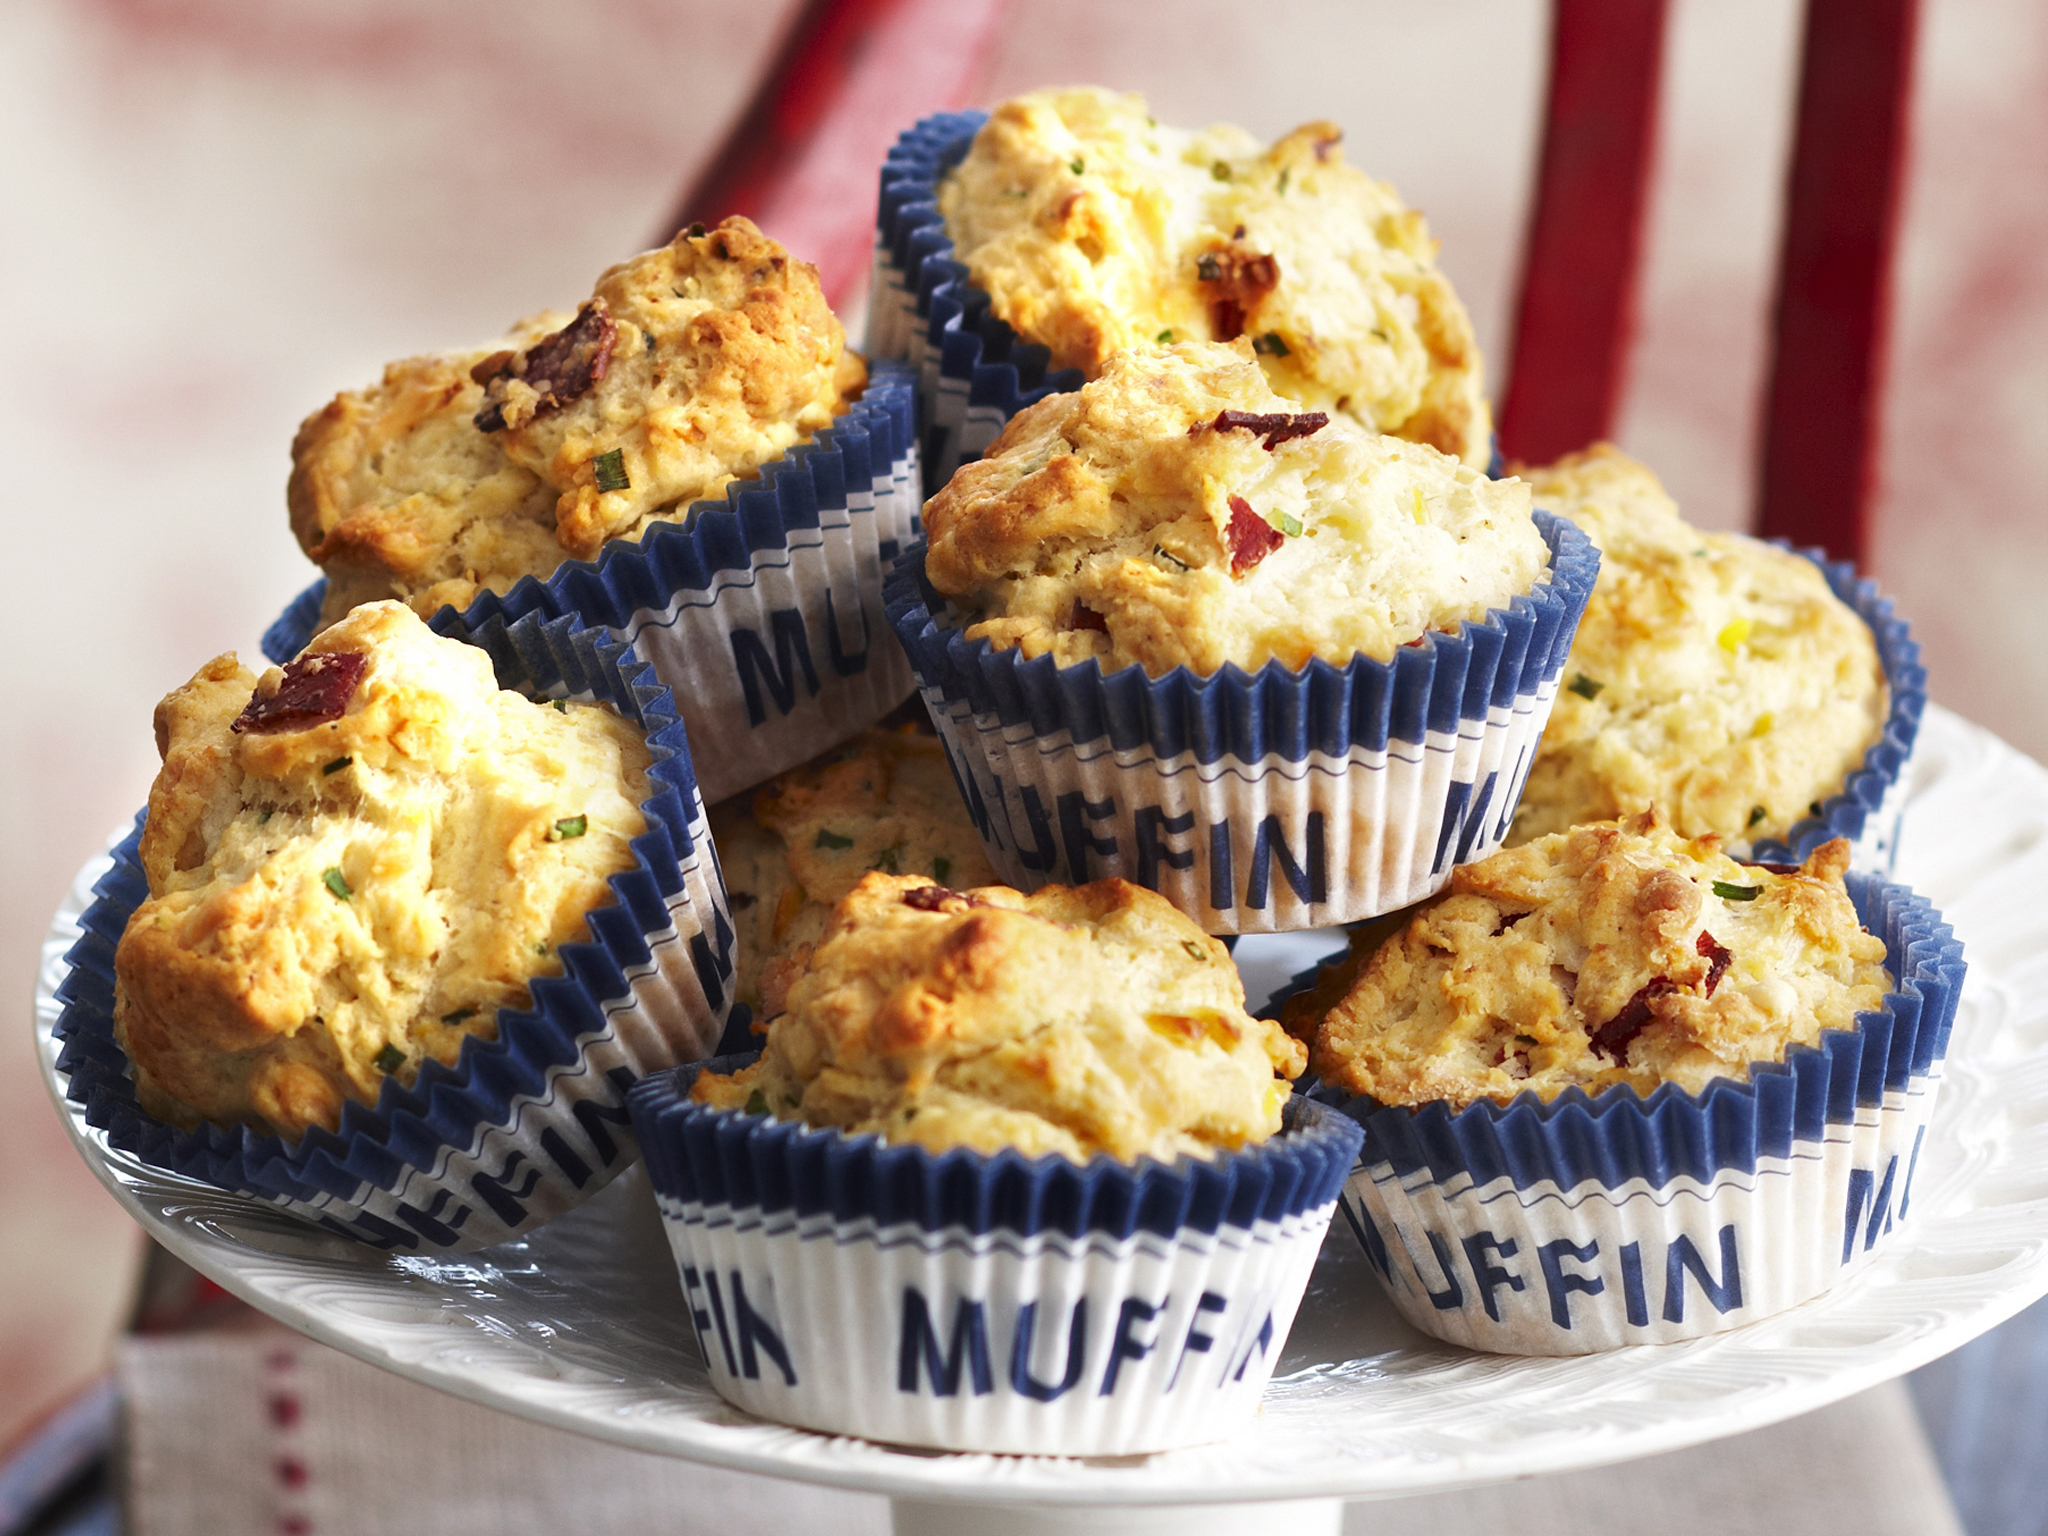 Savoury muffins recipes for school and work snacks